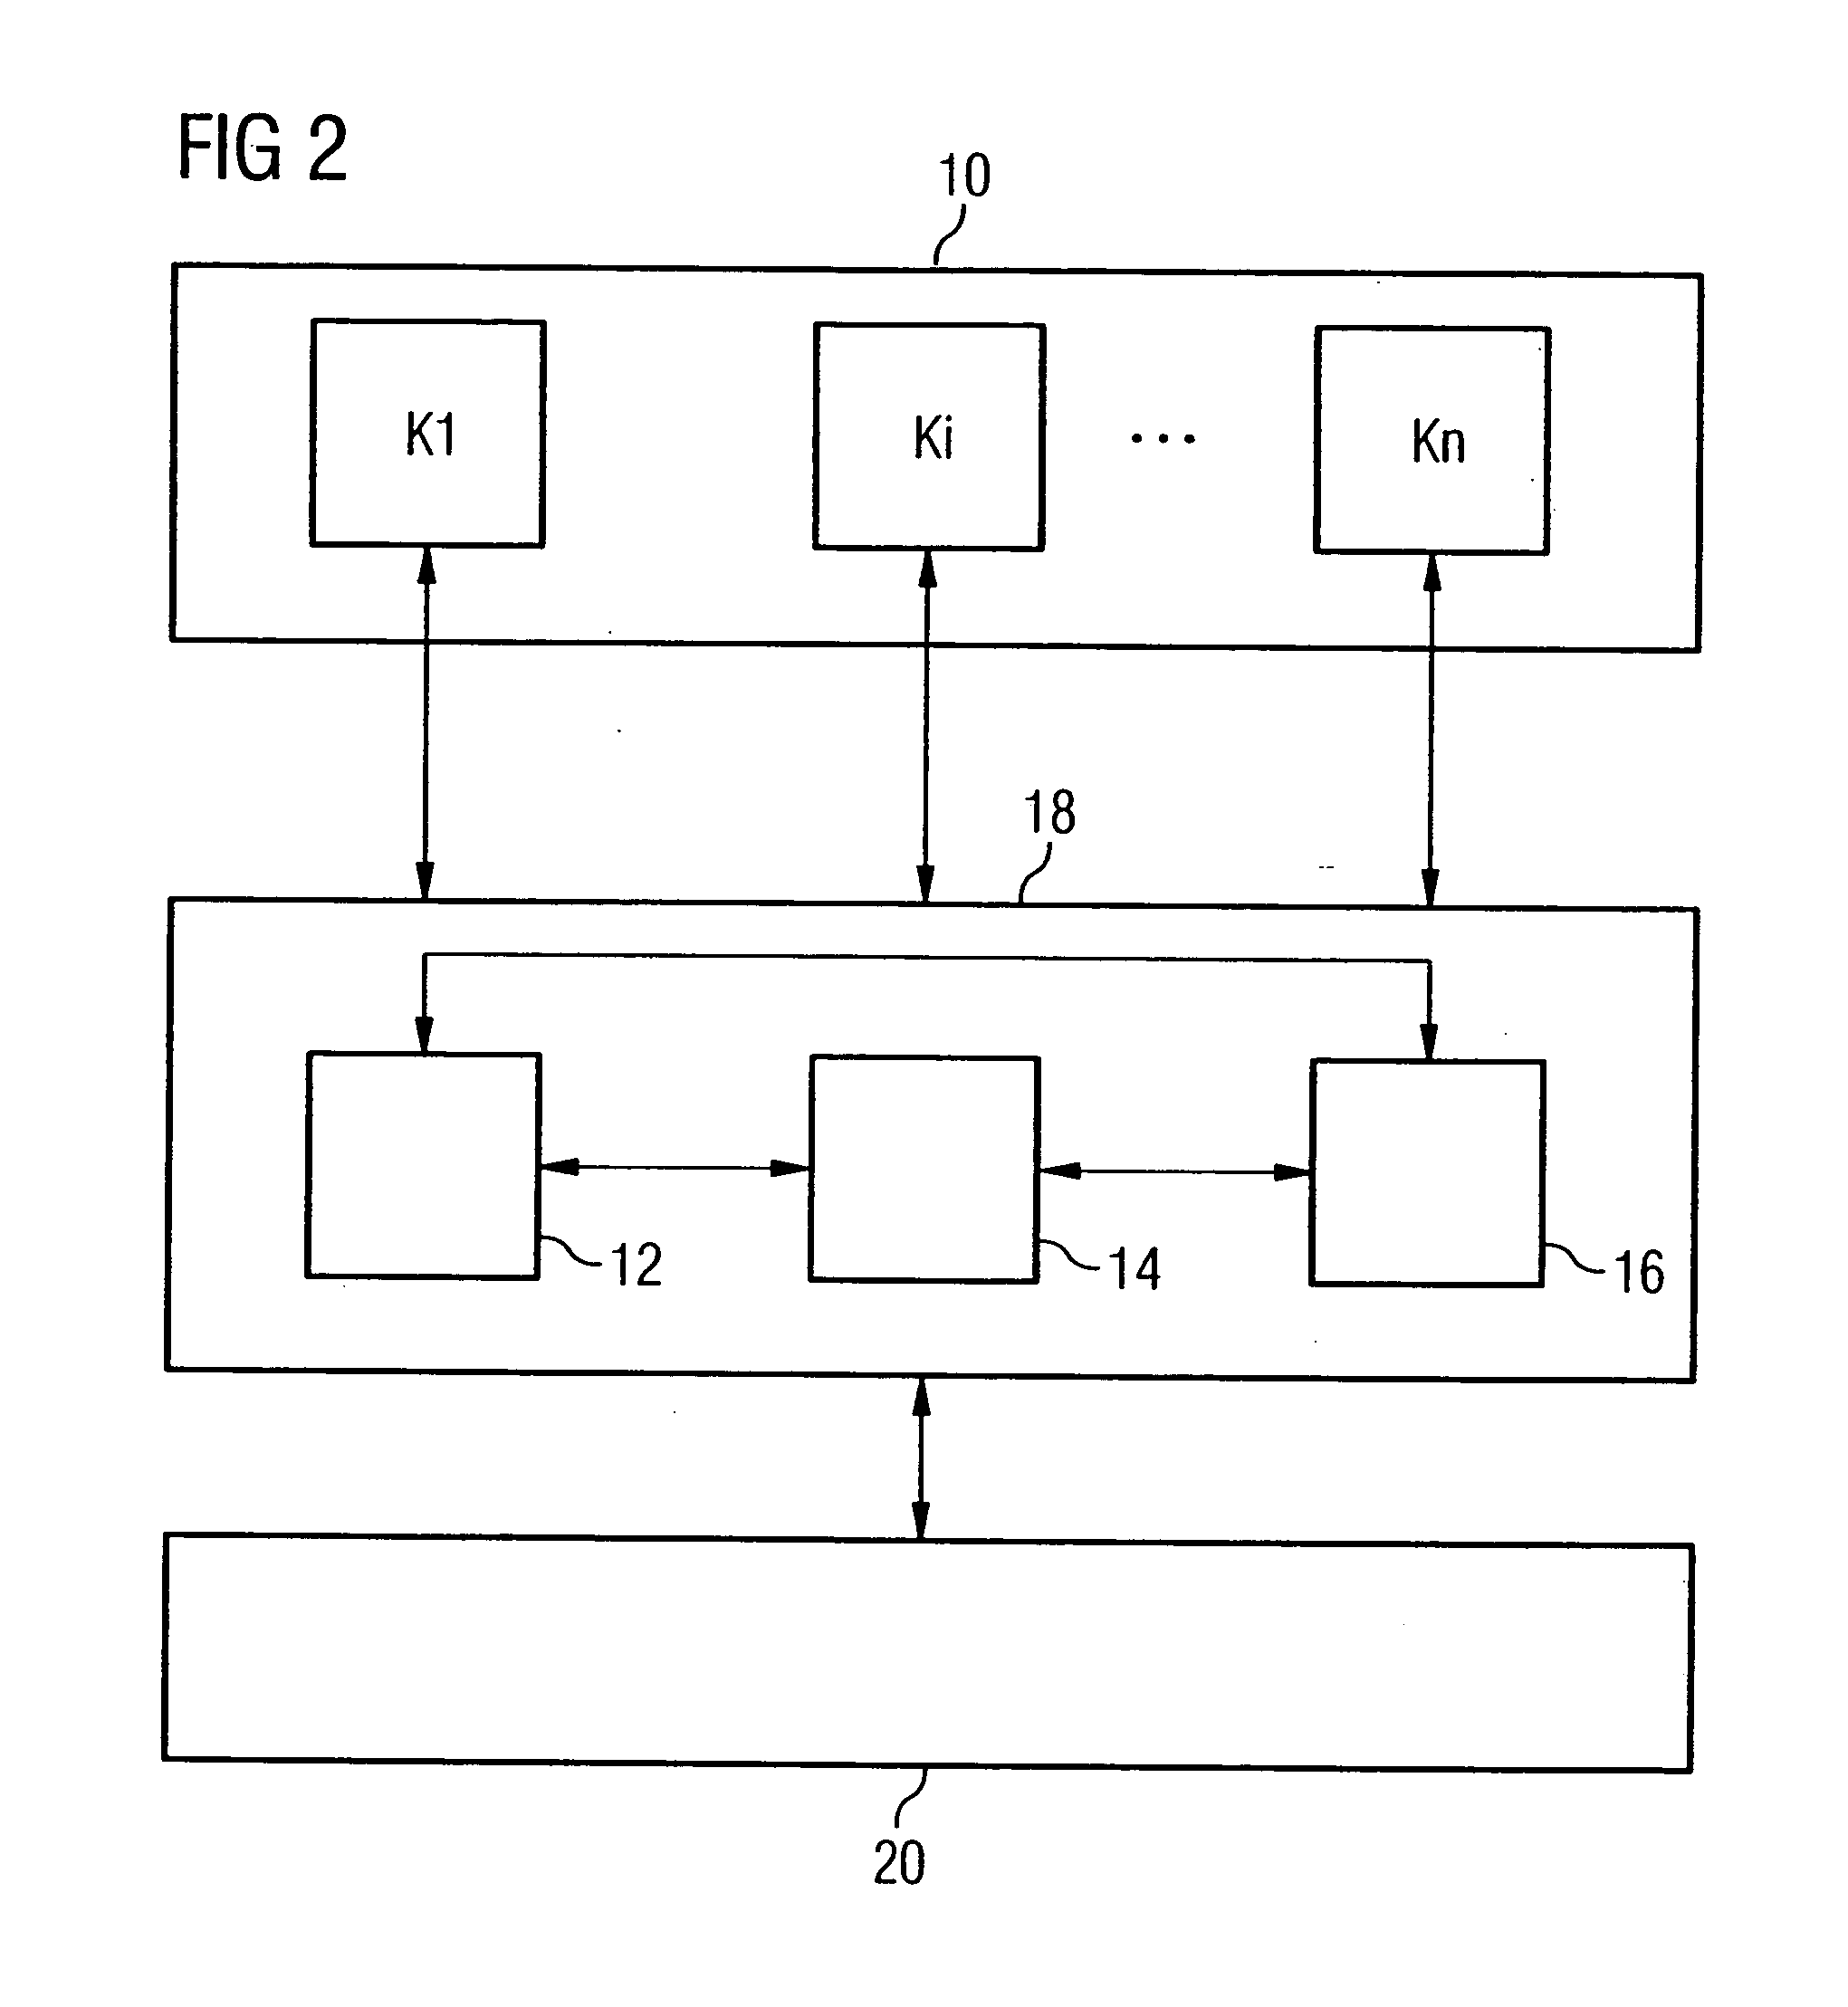 Method and apparatus for diagnosing monitoring systems of technical equipment